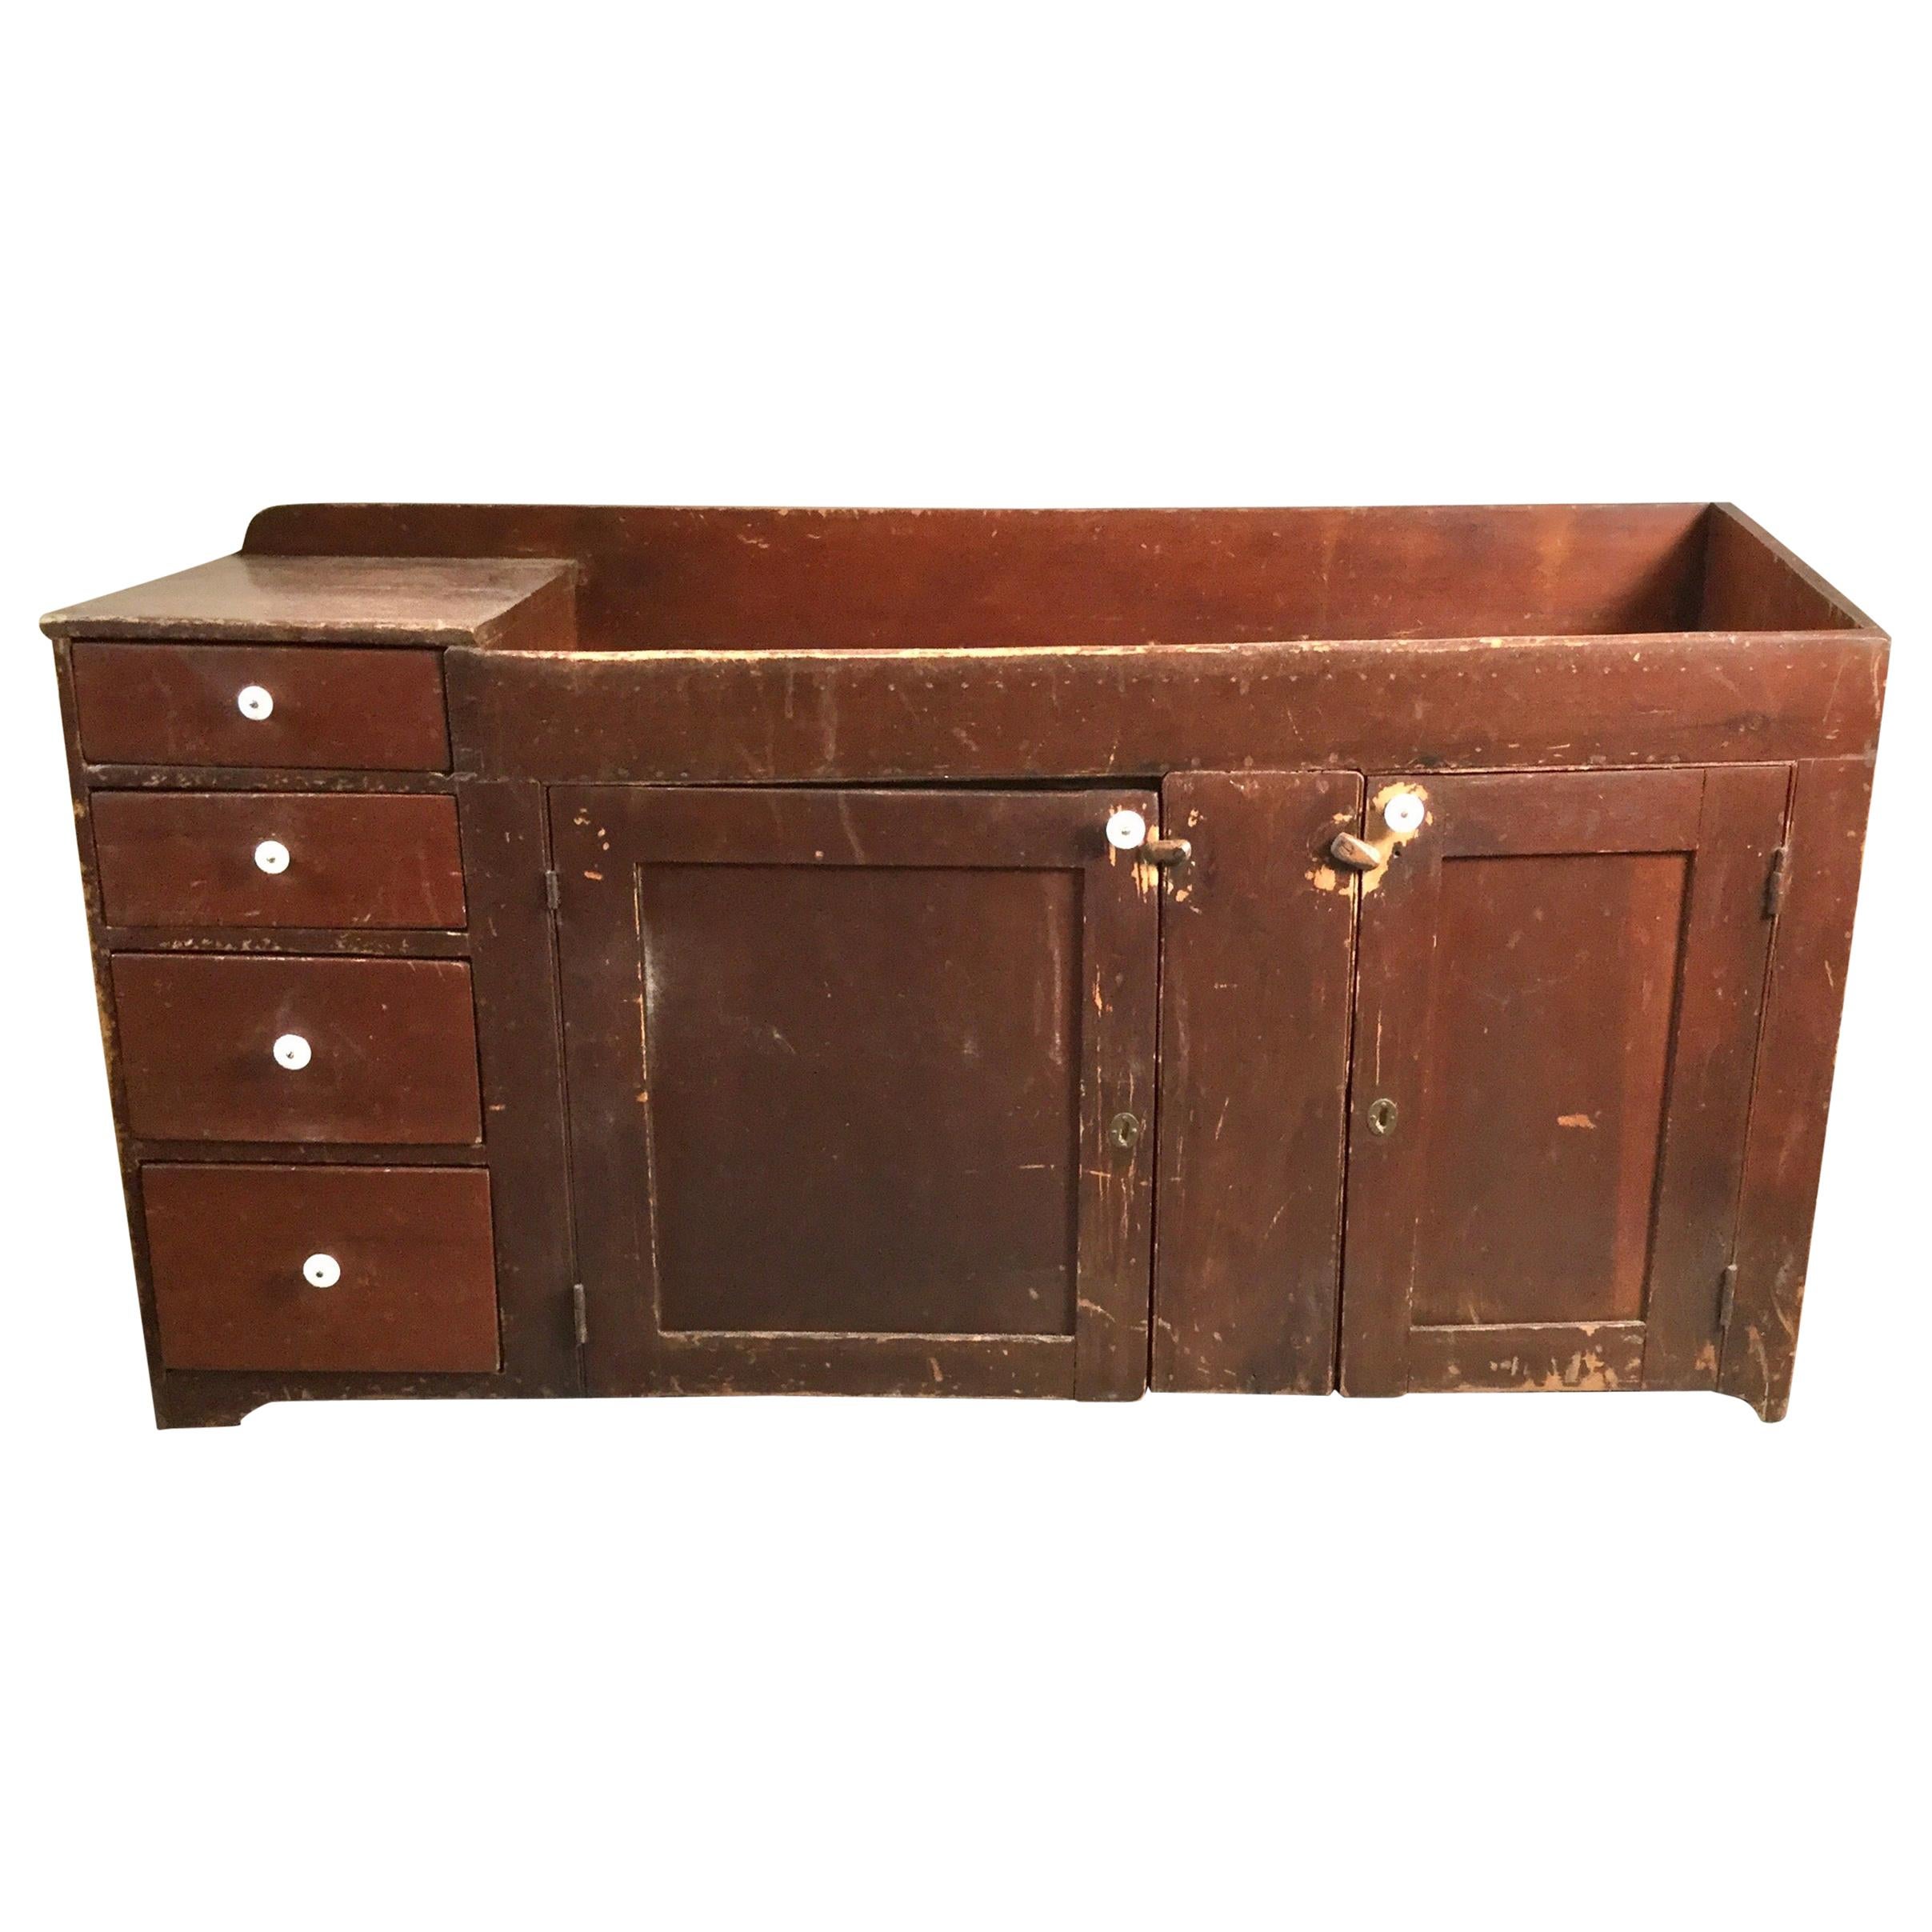 Early Painted Primitive Pine Dry Sink, 1830s For Sale